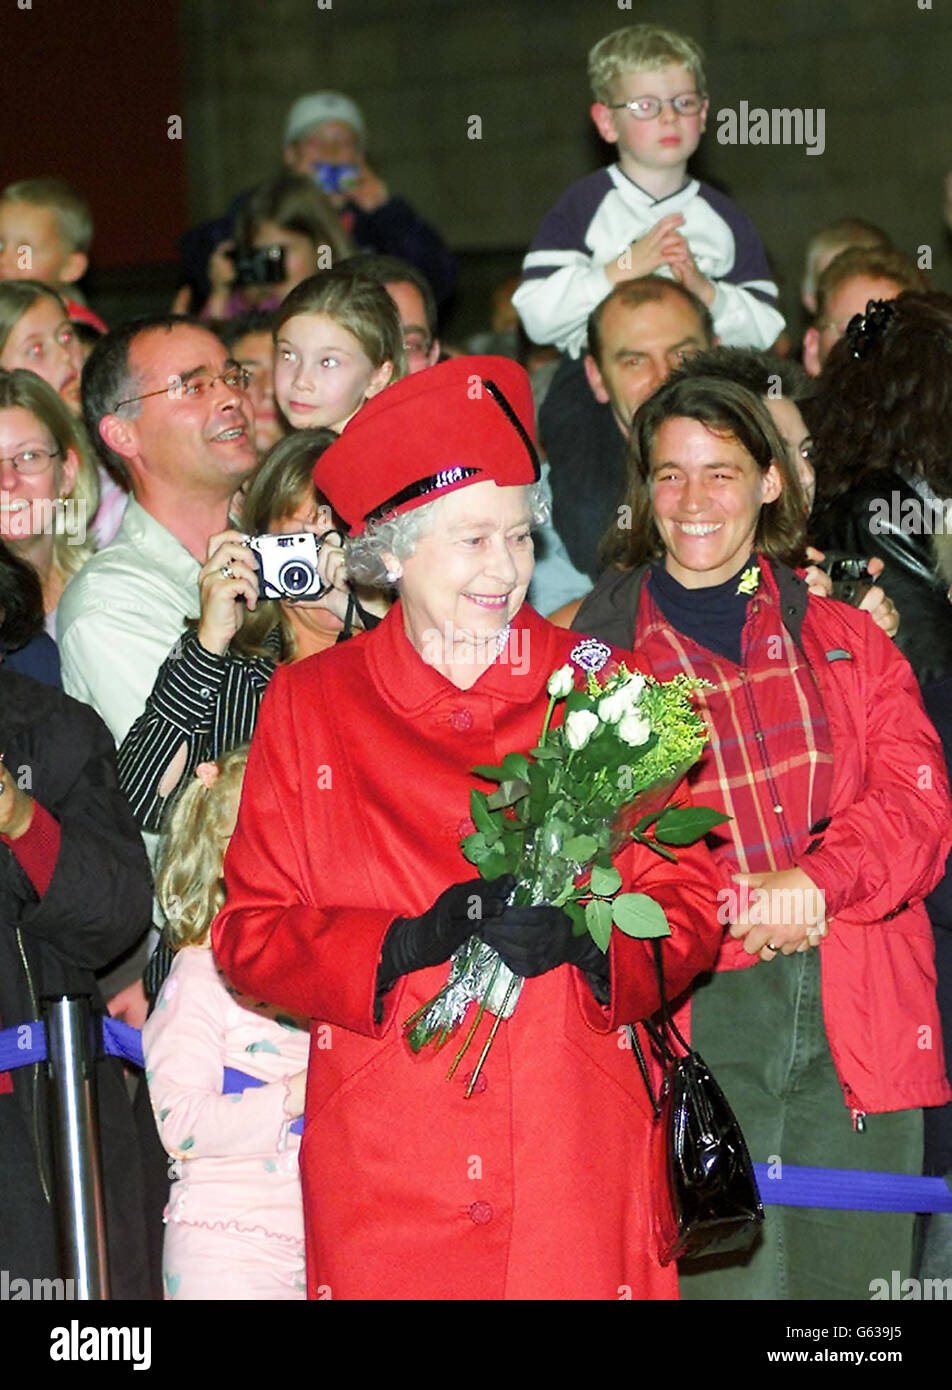 Queen Elizabeth II leaves the crowds with a bouquet of flowers she received during her visit to the new Darwin Centre, at the Natural History Museum, London. The Queen was visiting the 30 million Centre for its official opening. Stock Photo